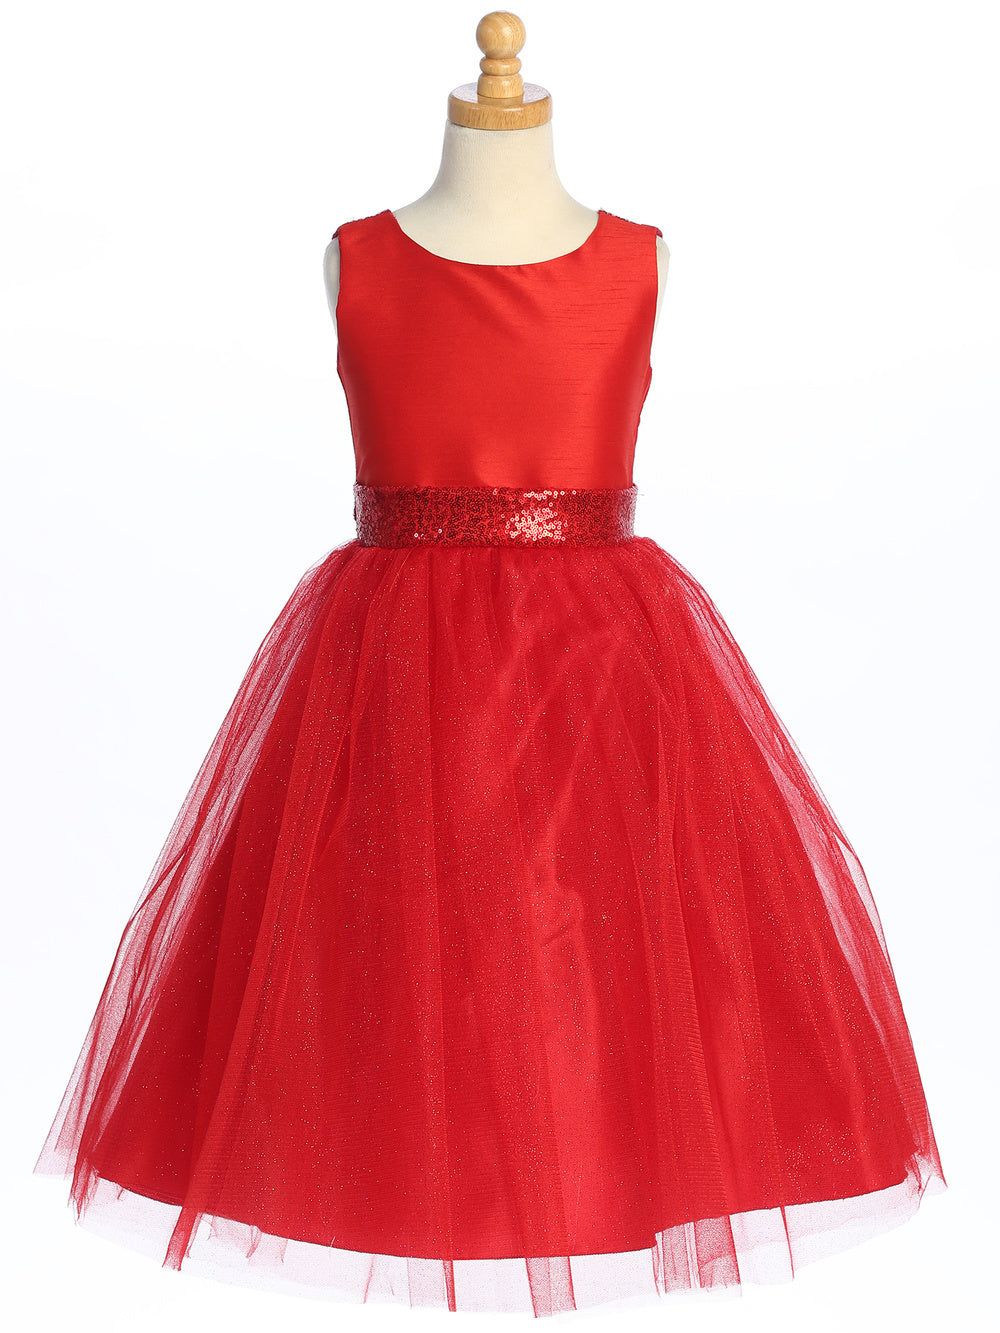 Red shantung dress with sparkle tulle and sequins, a fiery dream for a flower girl.